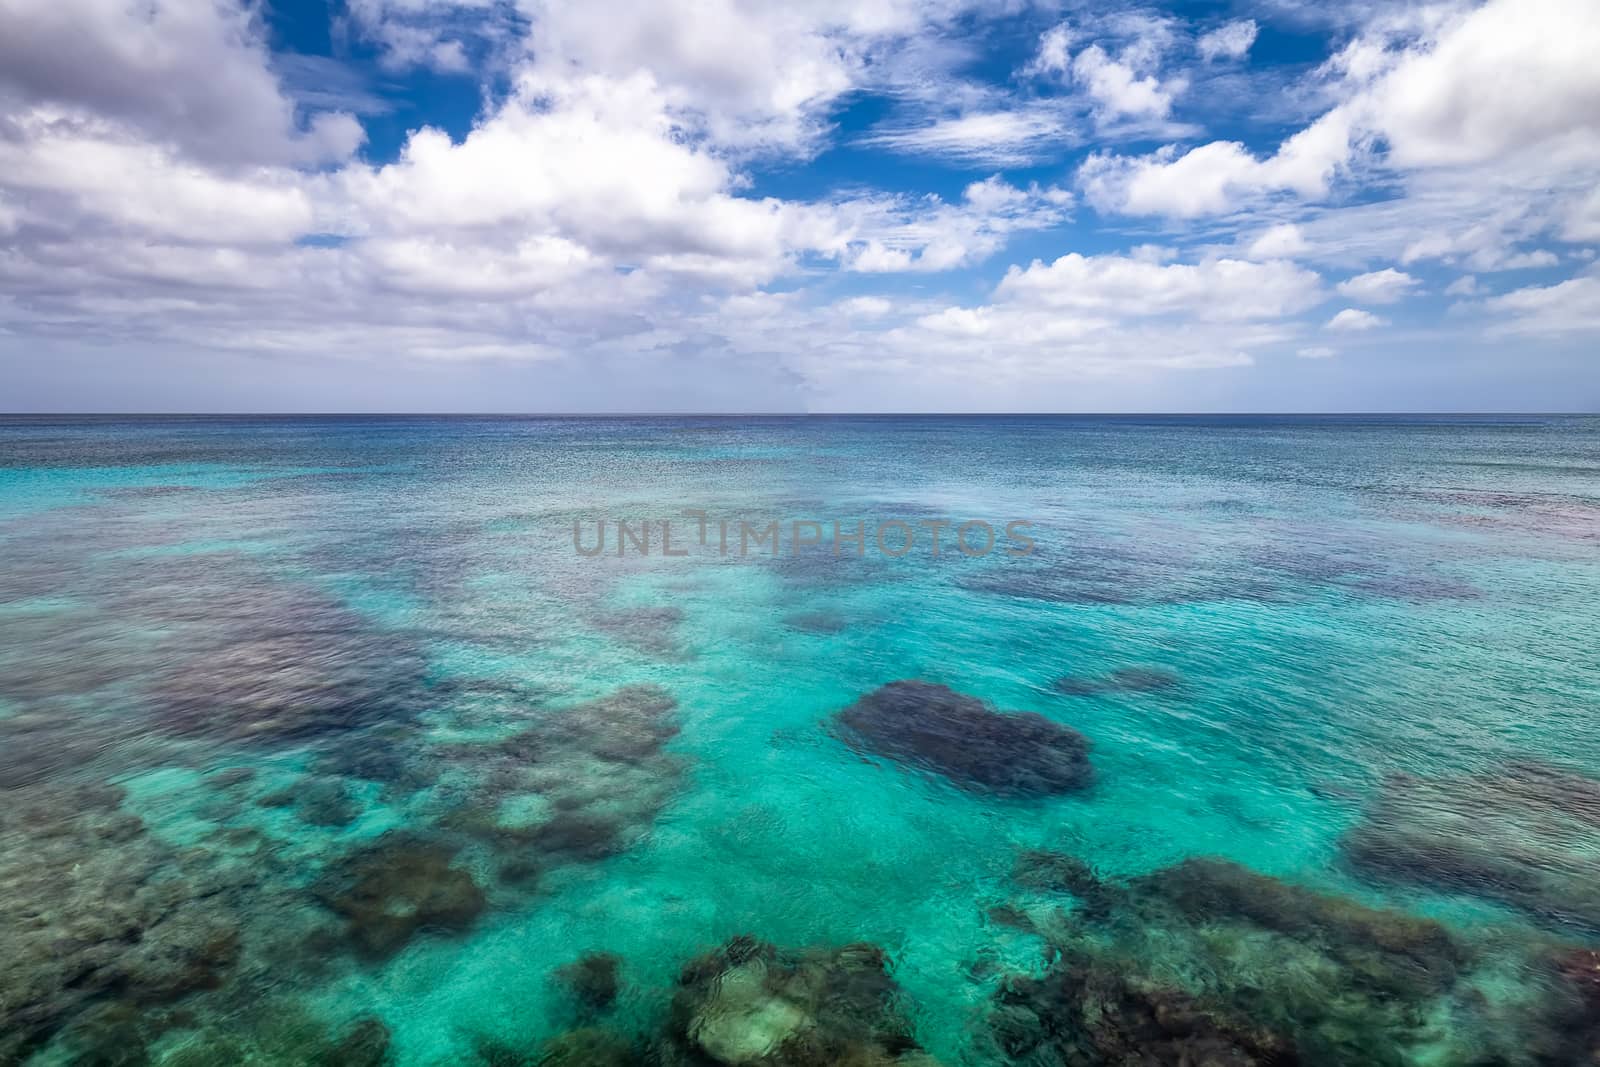 Background view of shallow turquoise waters with coral reefs underneath the surface, clear horizon line, blue sky and clouds in the background.